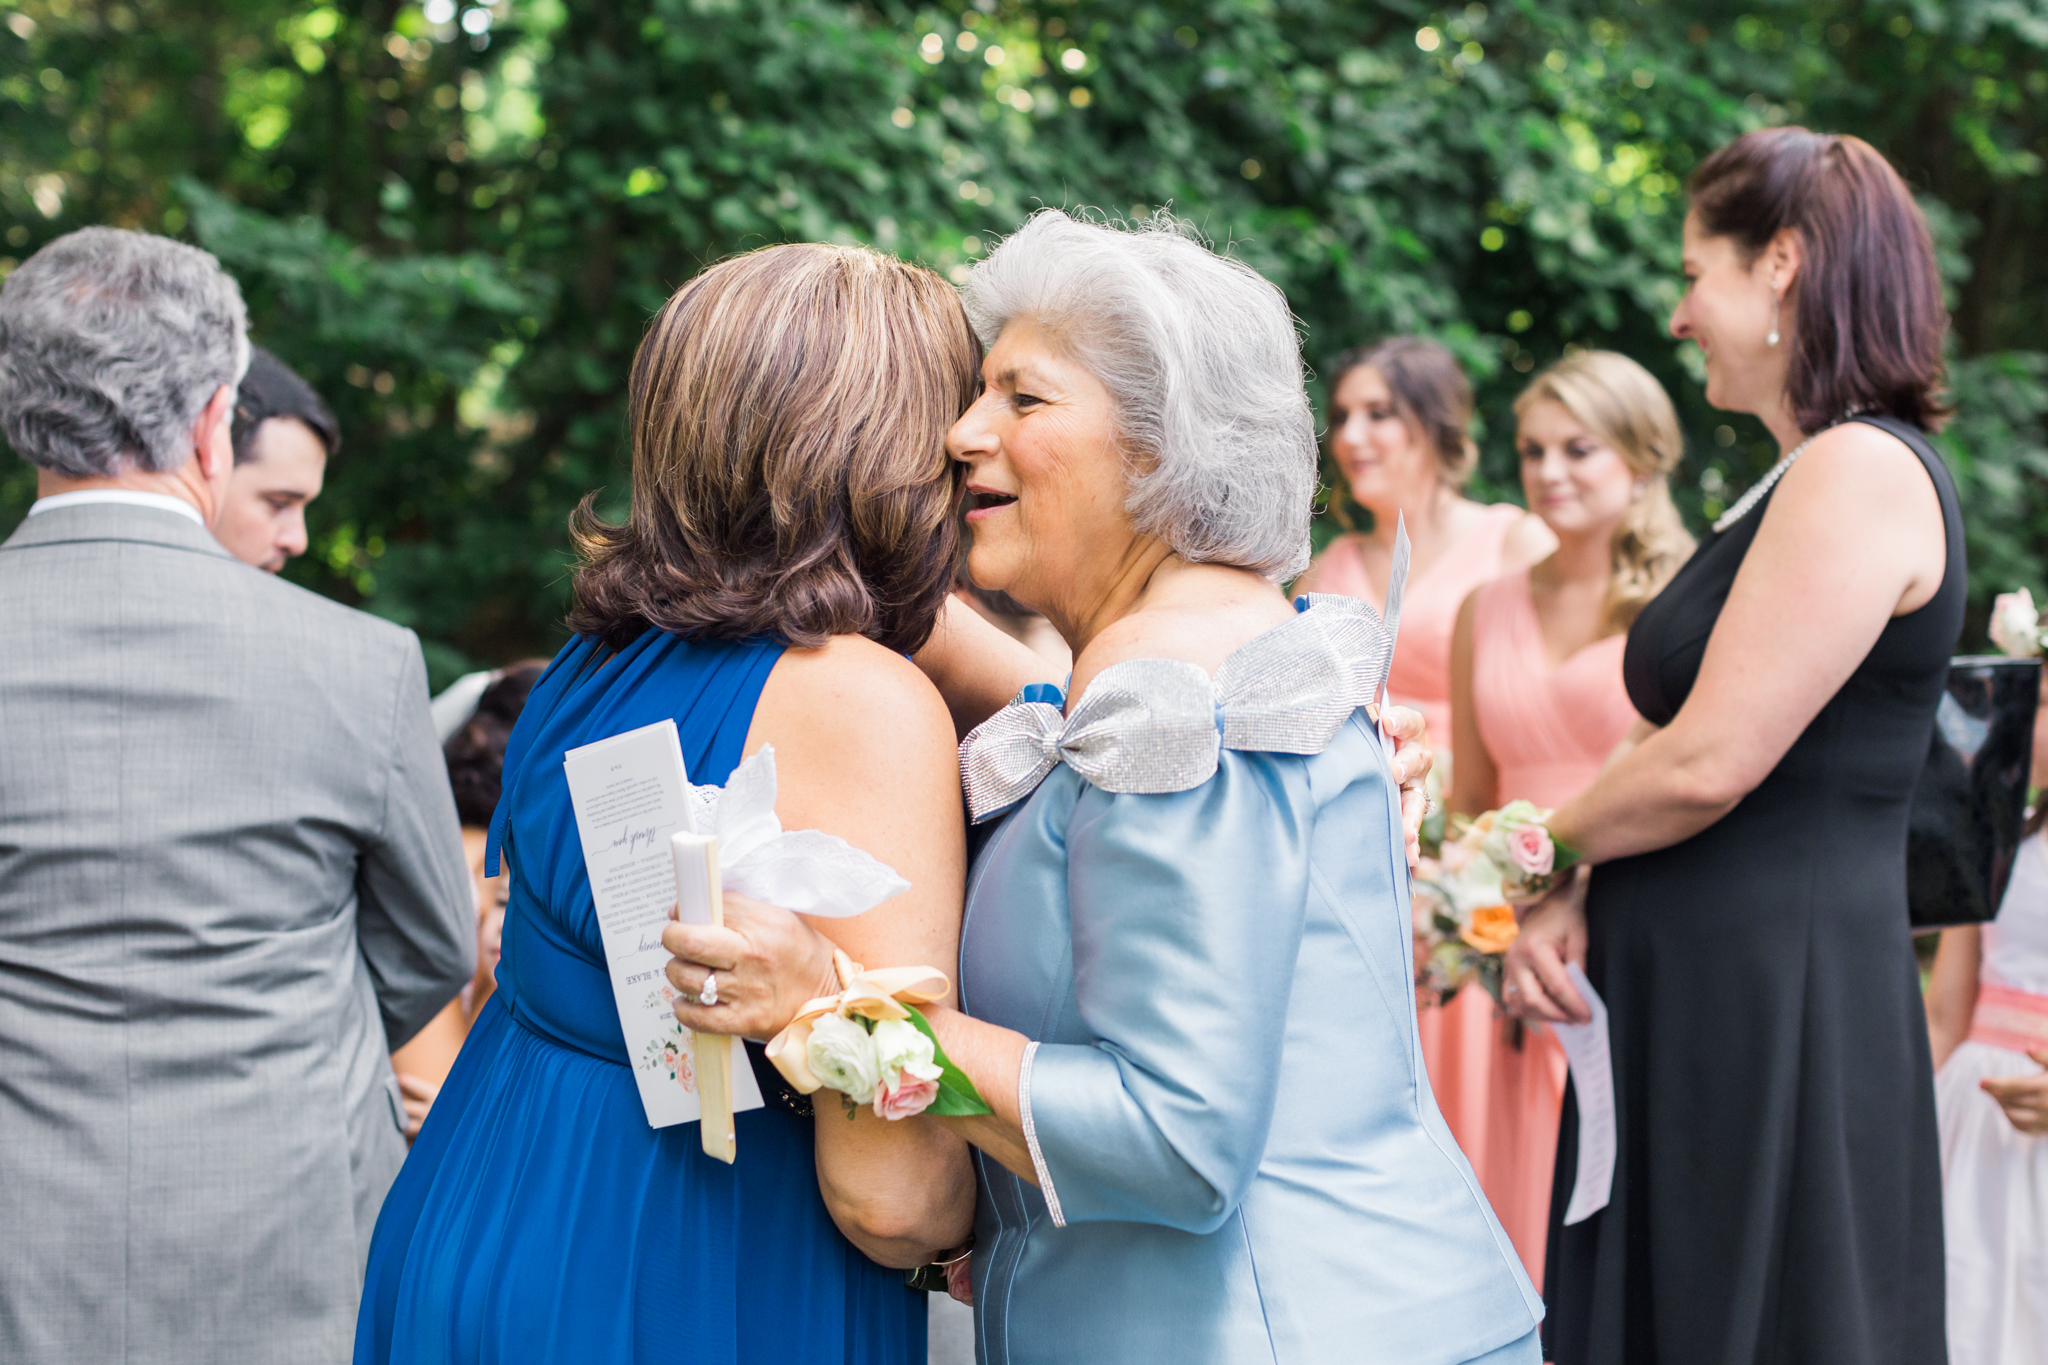 Mothers of the bride and groom hugging after the wedding ceremony!